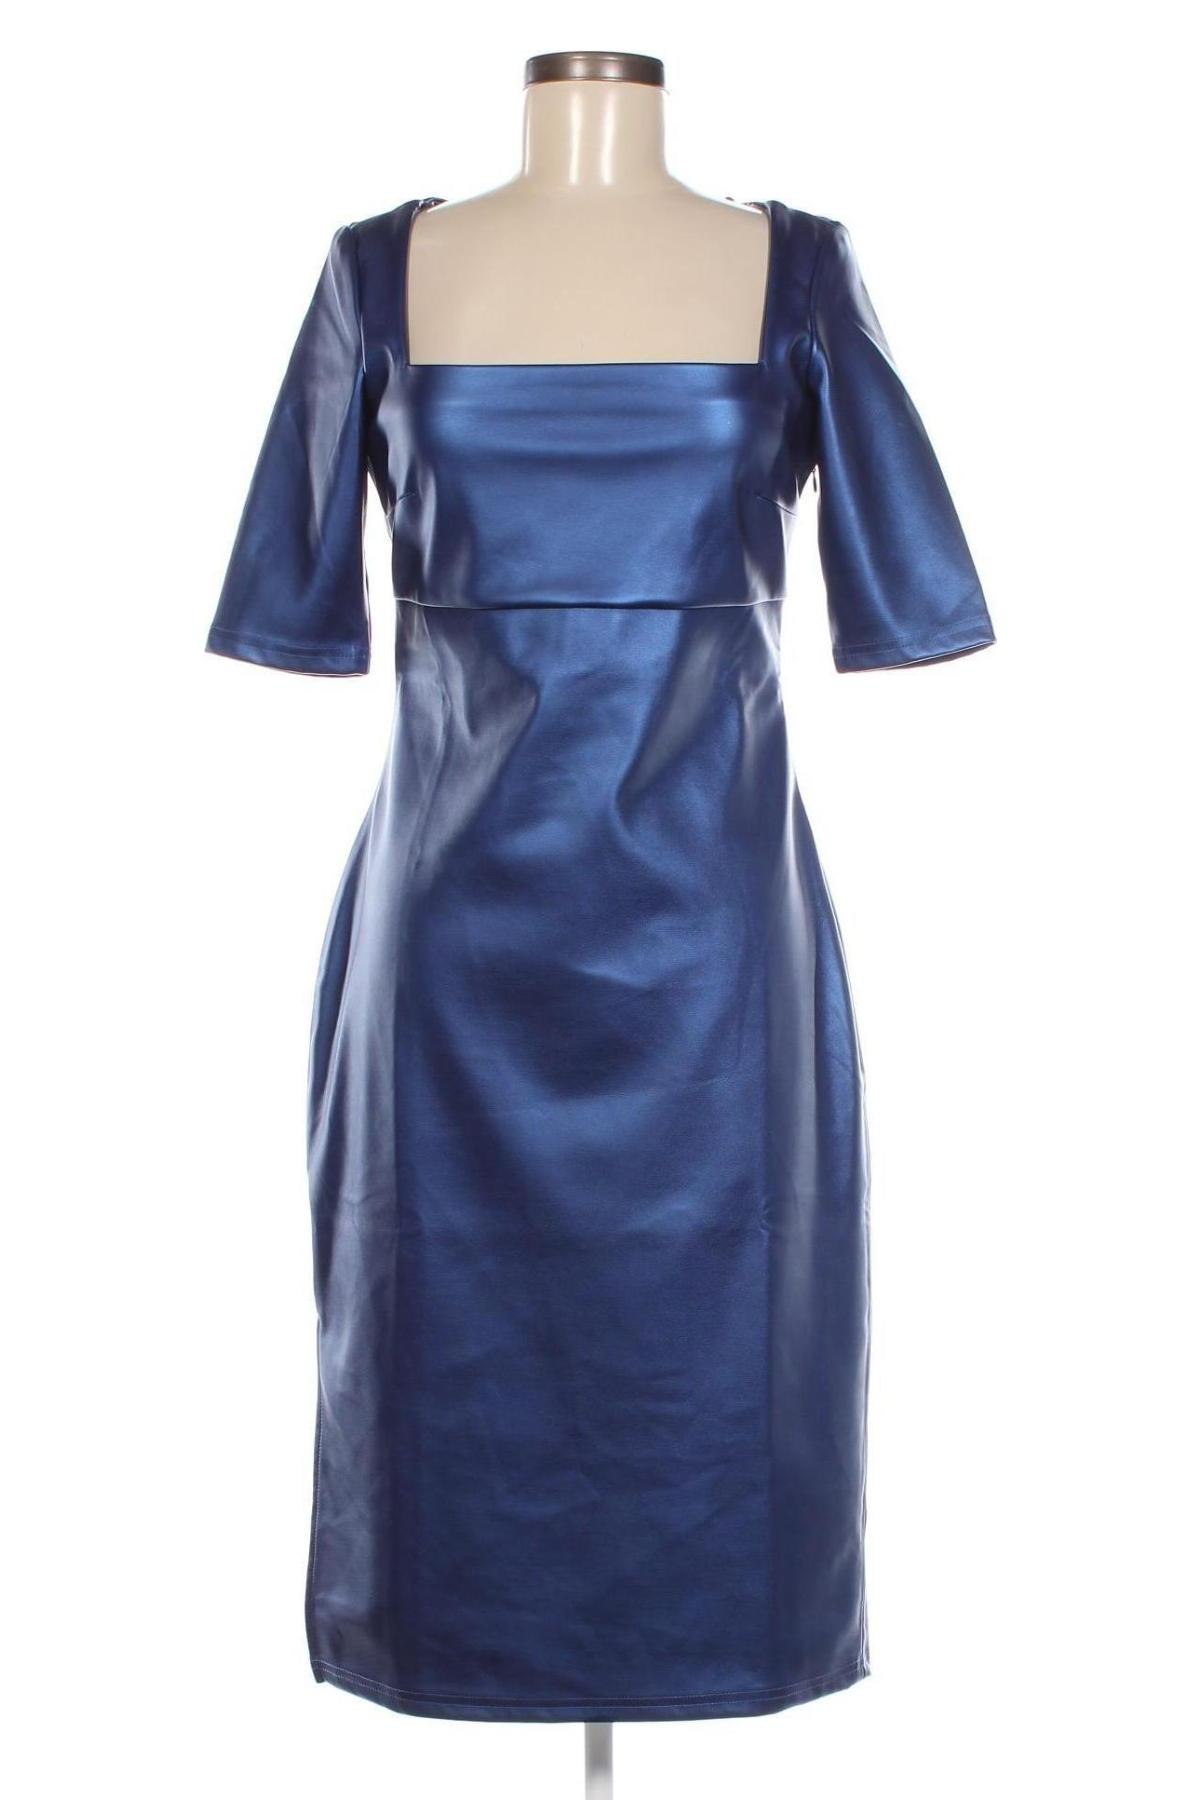 Kleid Katy Perry exclusive for ABOUT YOU, Größe M, Farbe Blau, Preis € 33,40